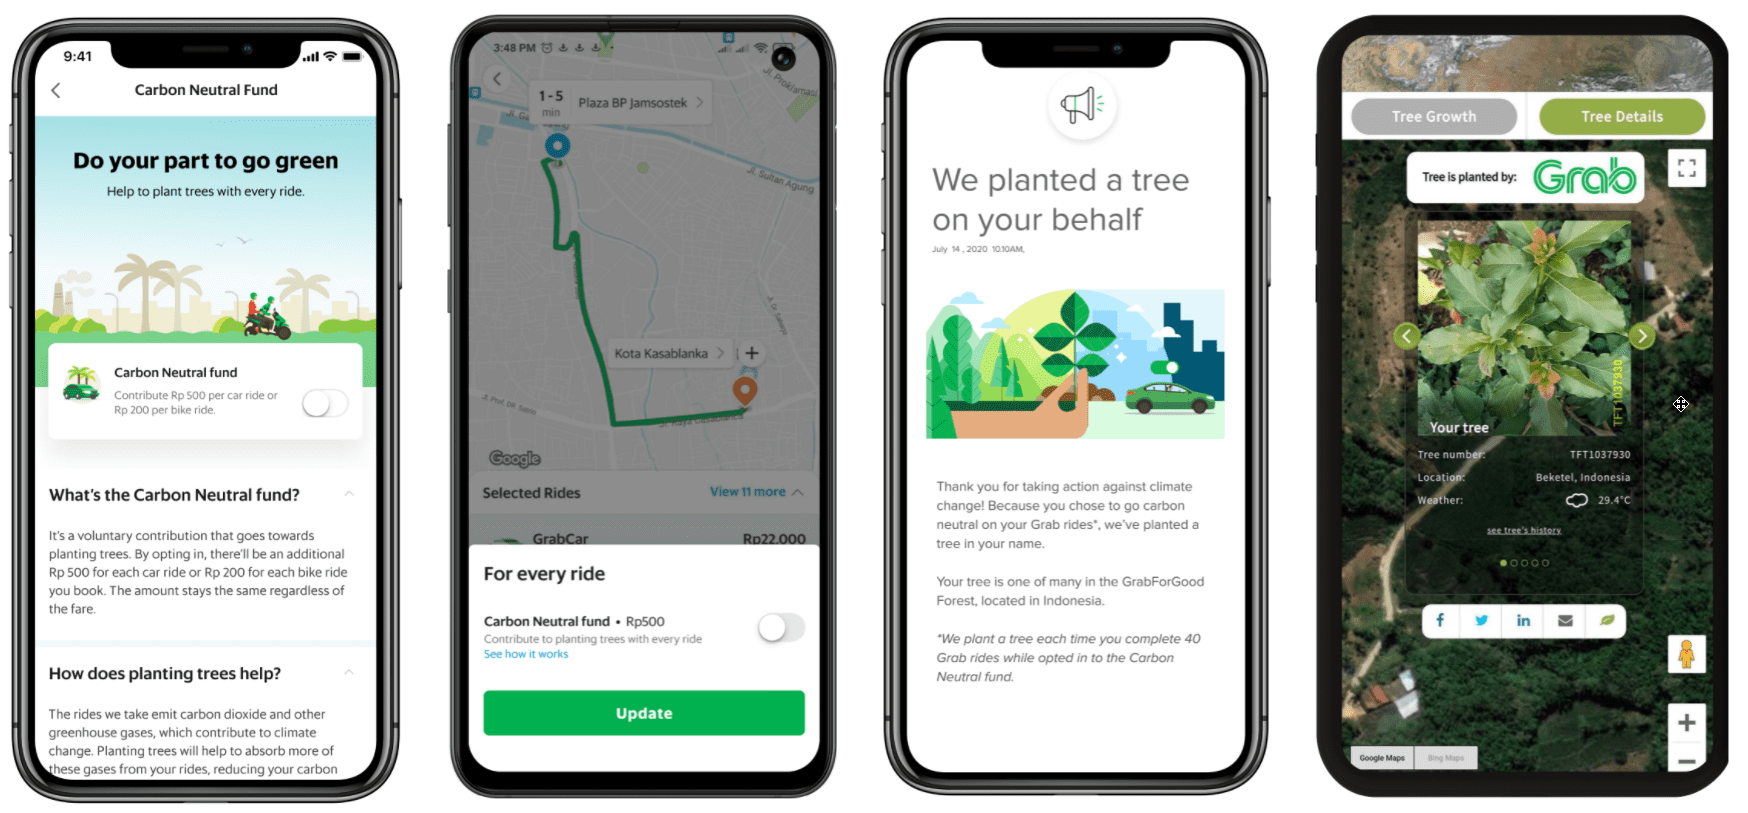 The screenshots of Carbon Neutral Fund on Grab application